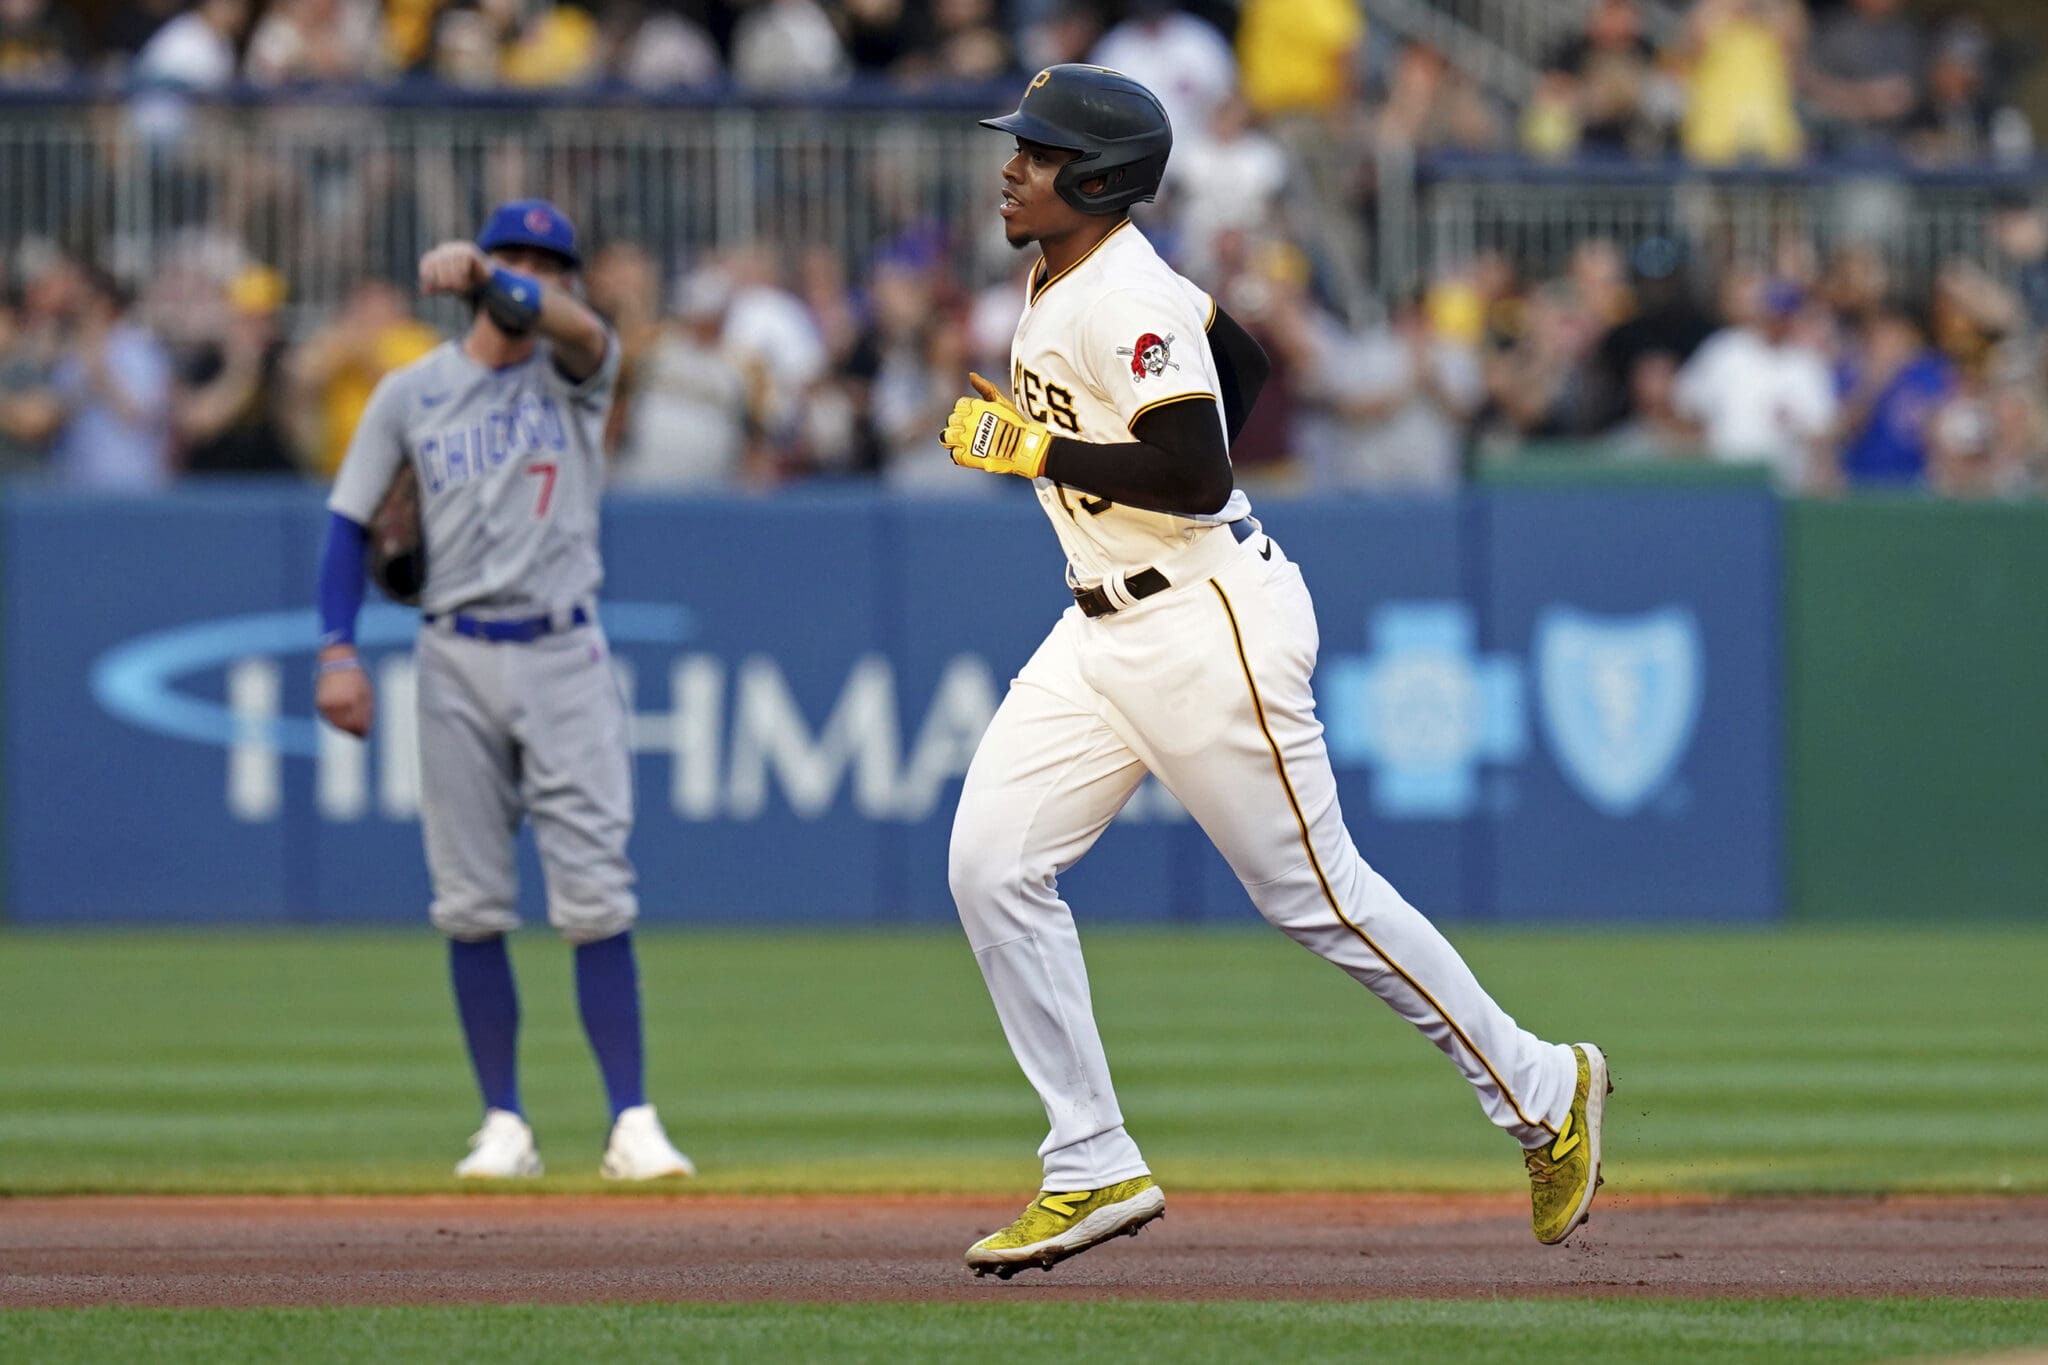 Pirates Overmatched by Wicks in MLB Debut; Rally Falls Short in